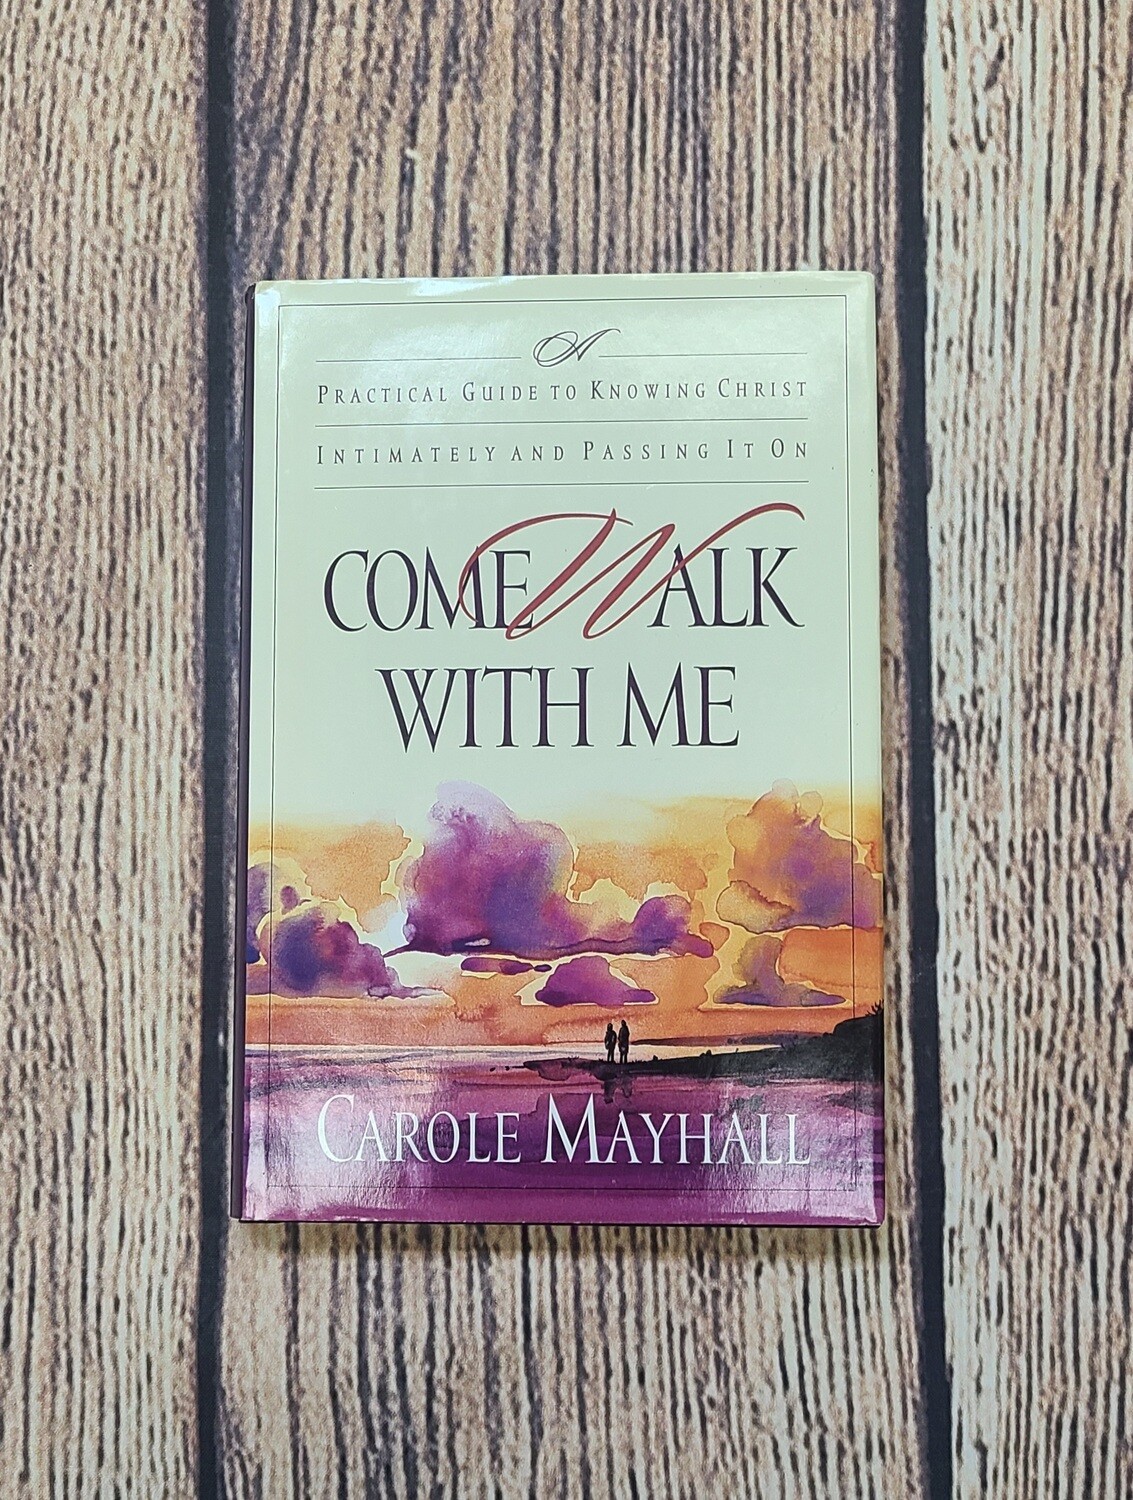 Come Walk With Me by Carole Mayhall